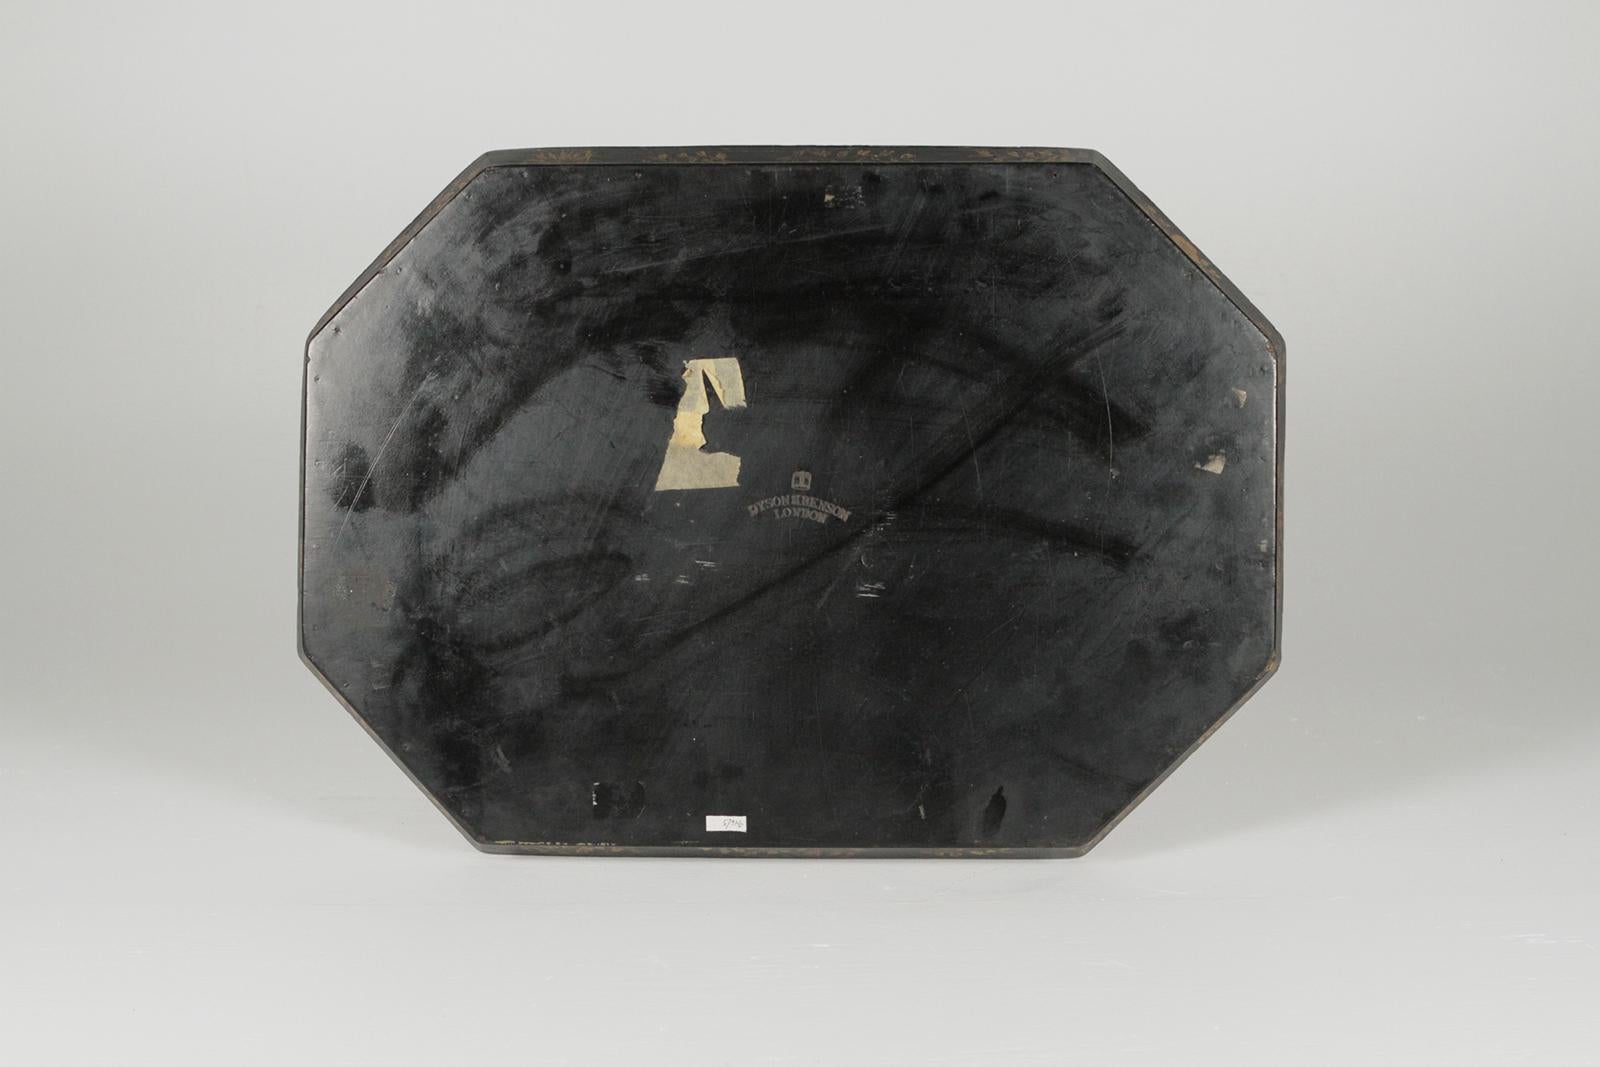 English late 19th century chinoiserie tray by Dyson and Benson, London. Papier mâché with a black lacquer and Asian inspired decoration. Elegant English aristocratic sty, well cared for condition.